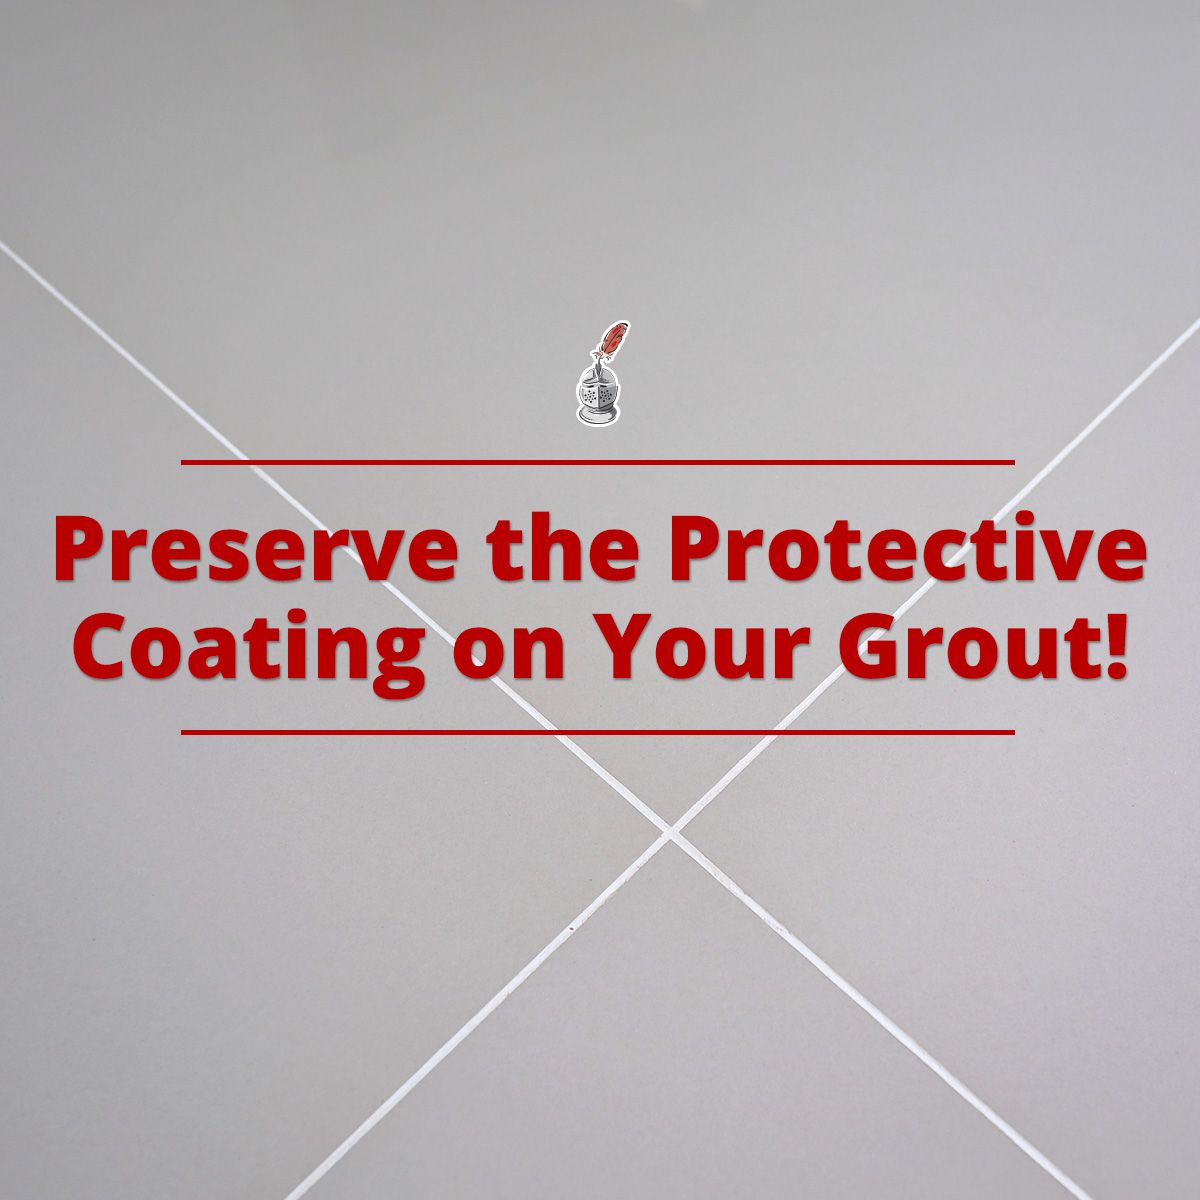 Preserve the Protective Coating on Your Grout!